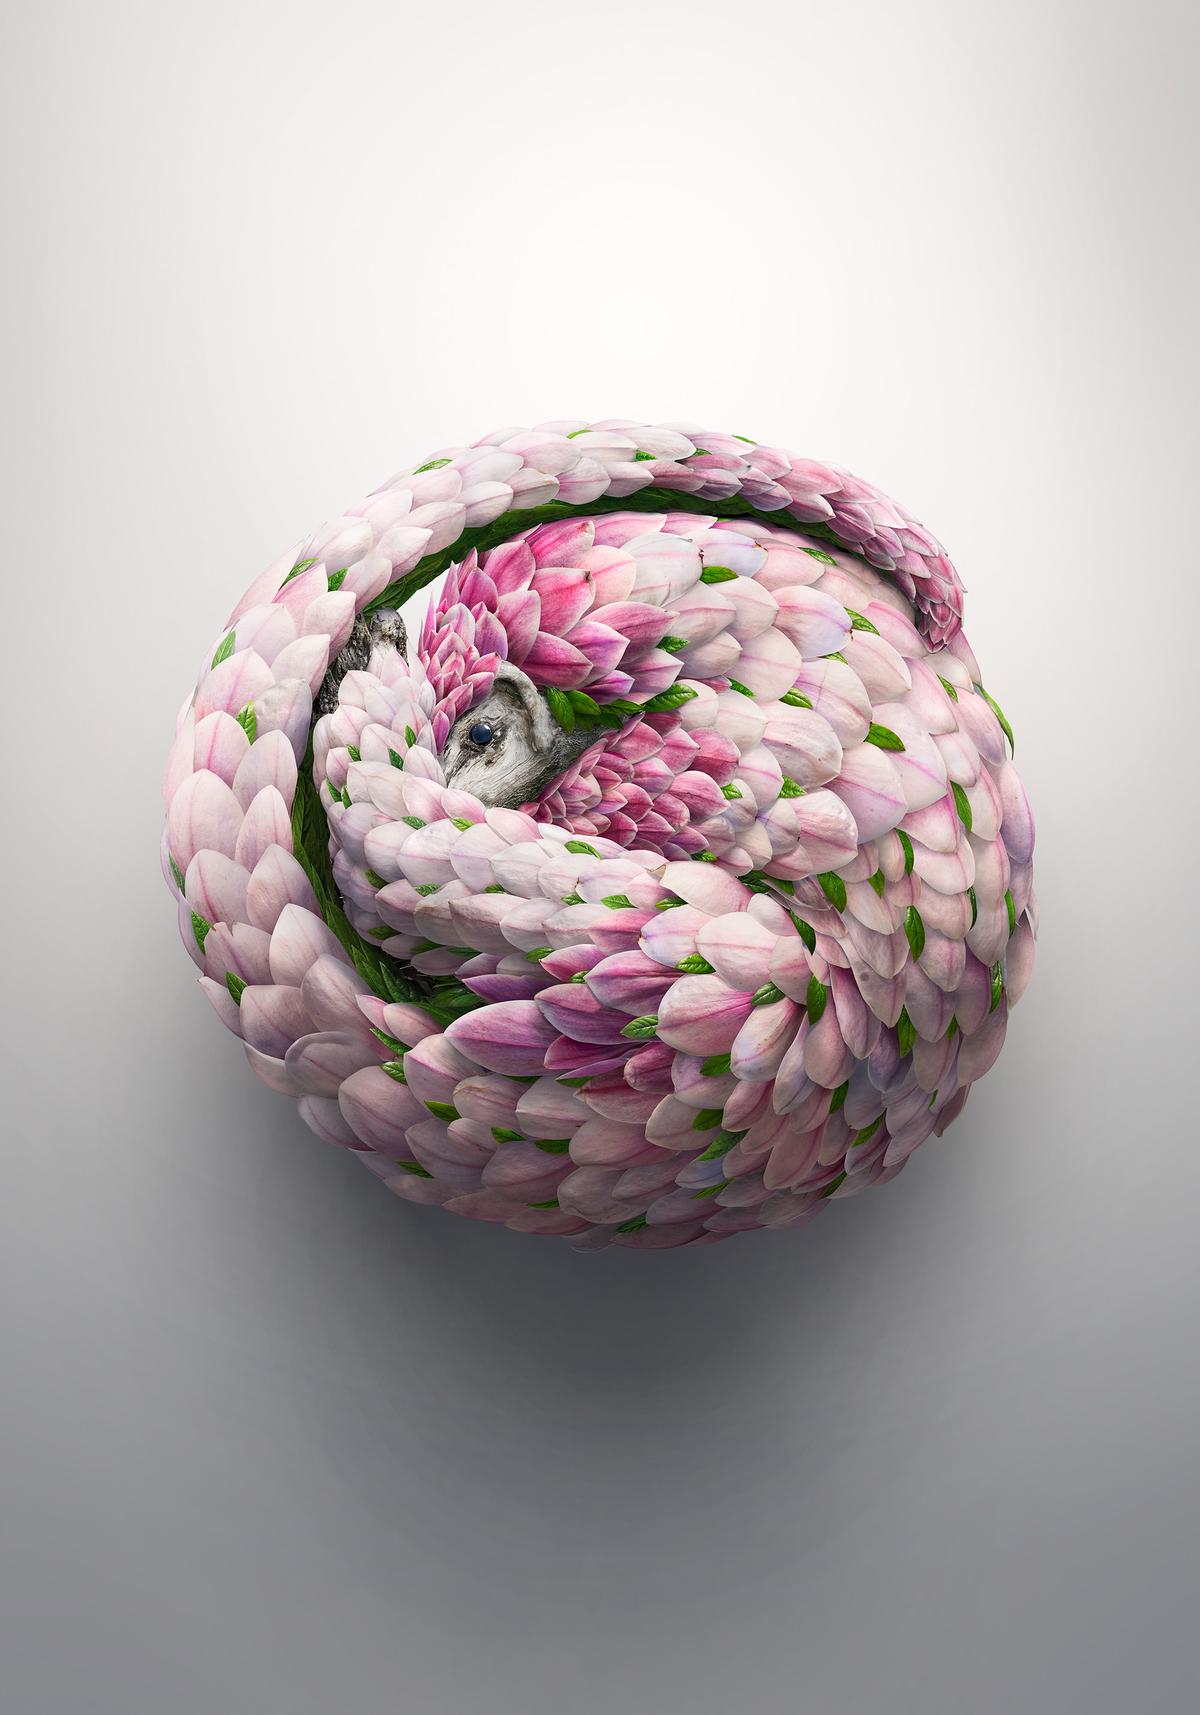 Magnolia flower petals are combined to resemble the scales of a pangolin. (Courtesy of <a href="https://www.instagram.com/joshdykgraaf/">Josh Dykgraaf</a>)